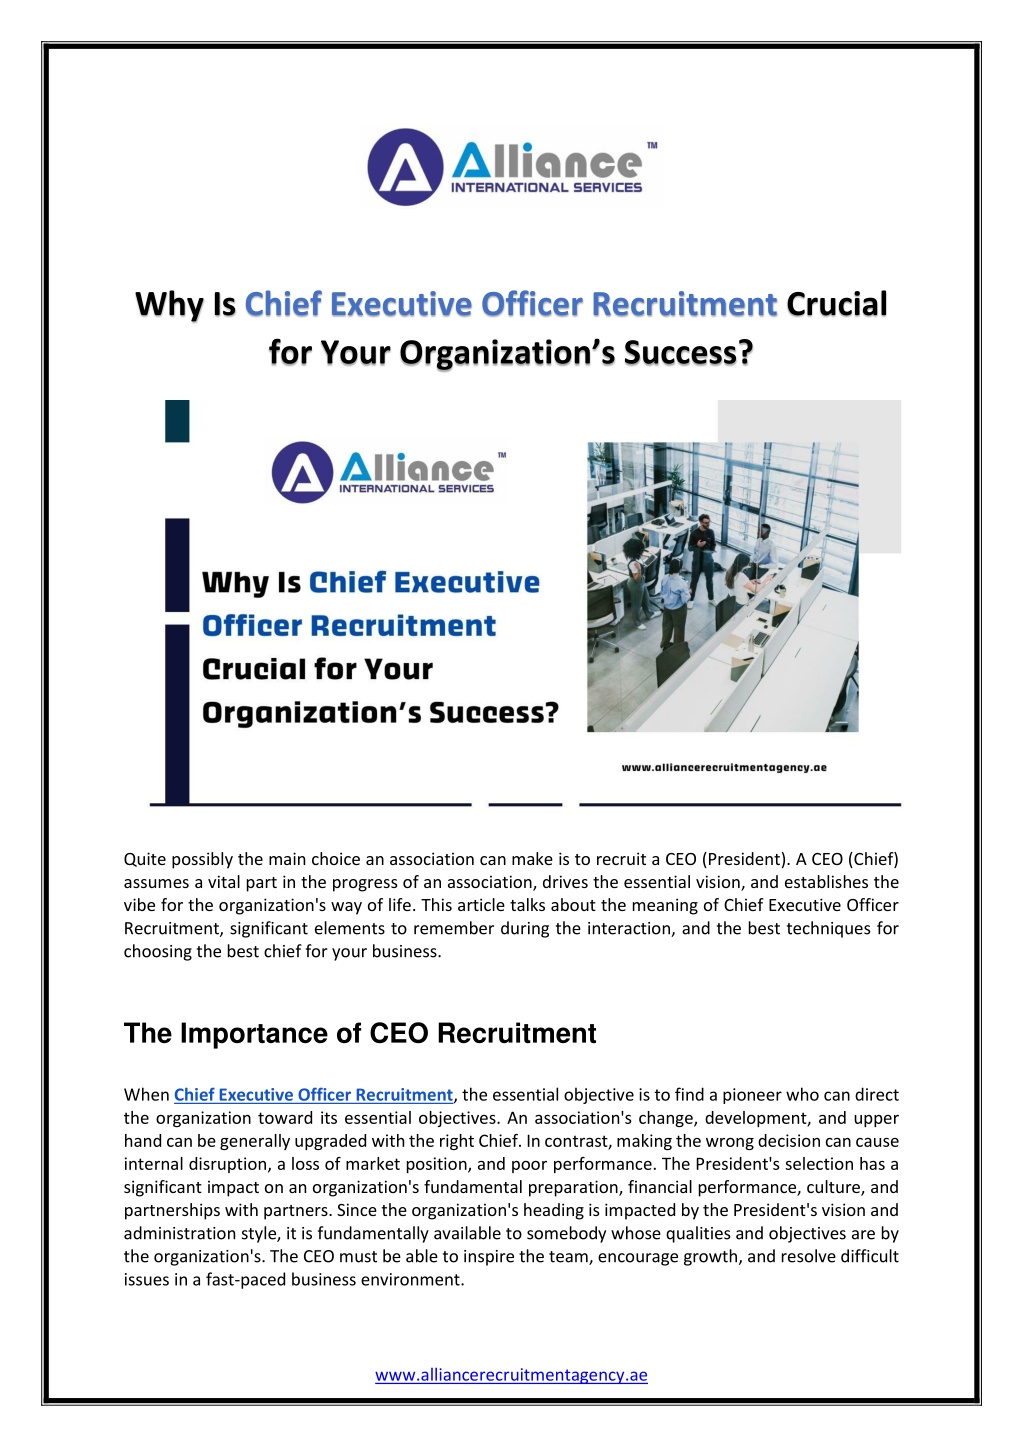 why is chief executive officer recruitment l.w